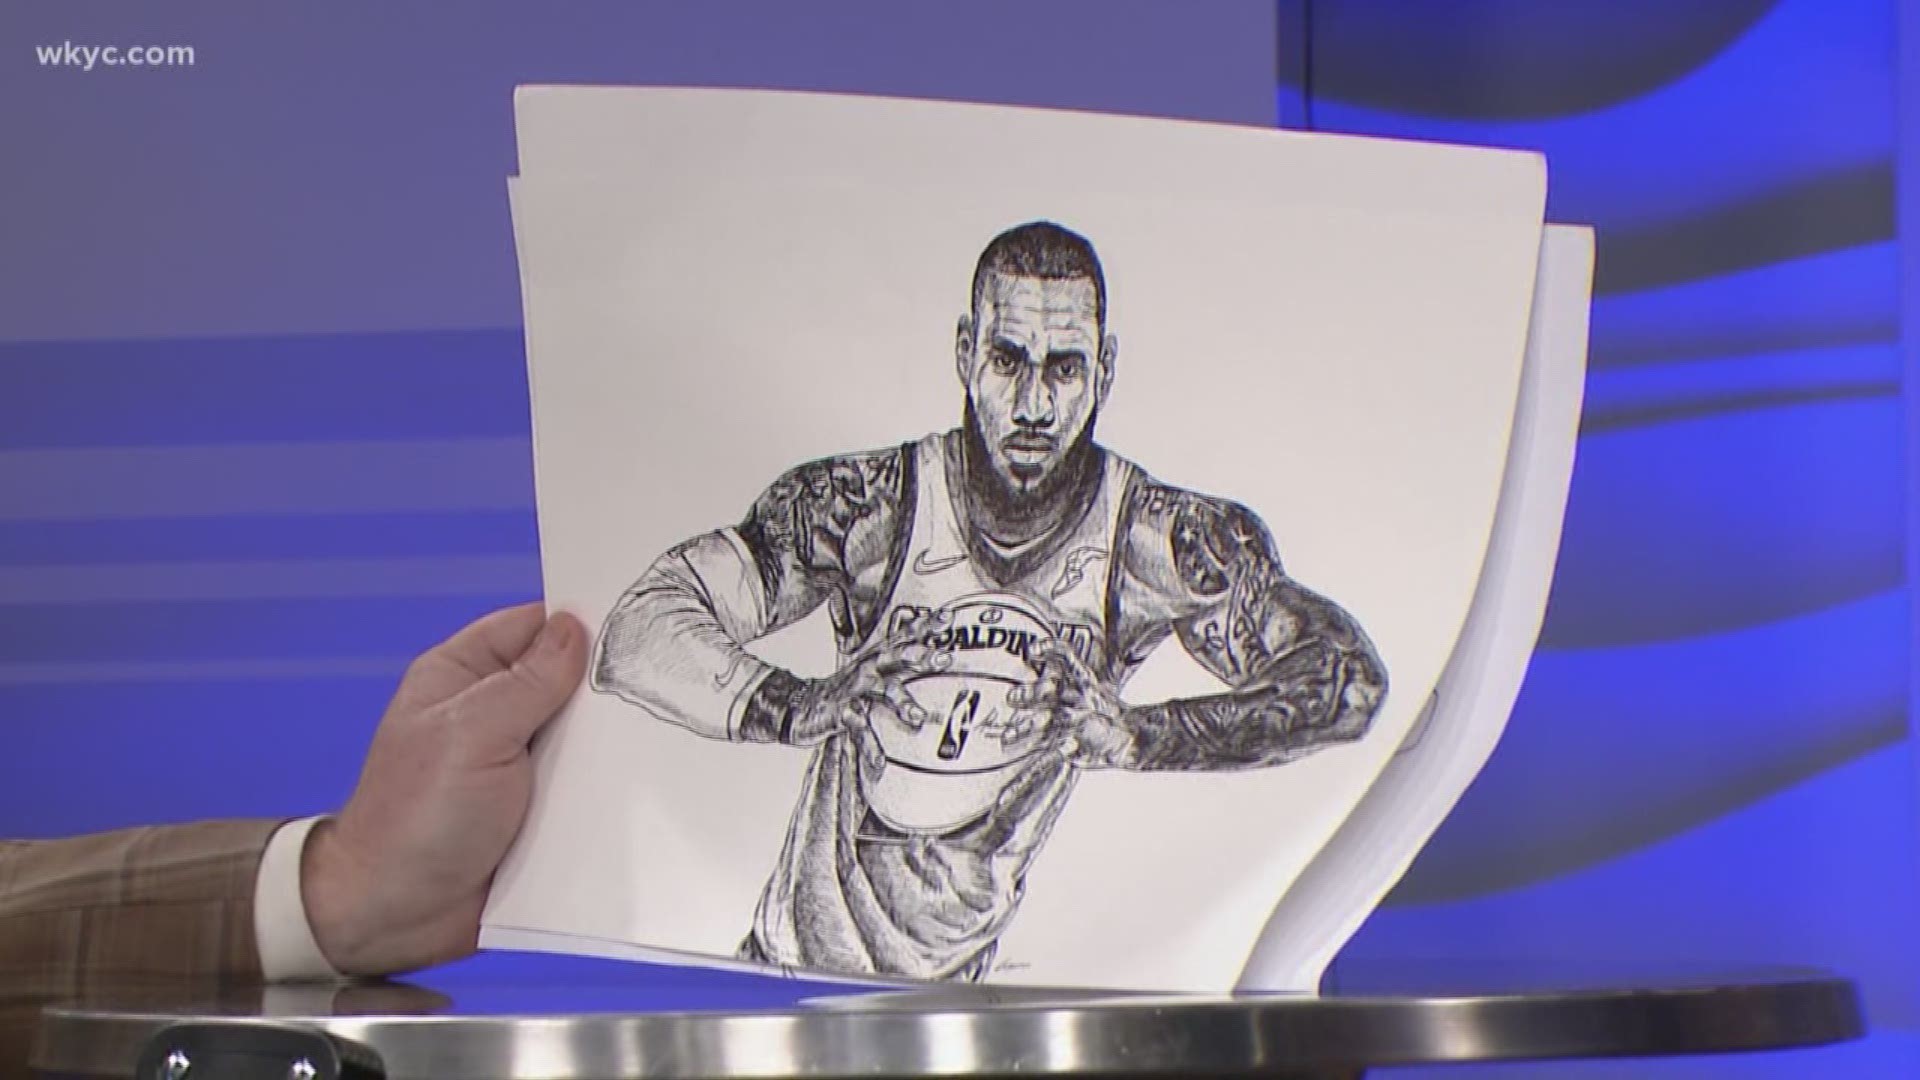 Nov. 30, 2017: Patrick Geyser joined us on WKYC to sketch a picture of Cleveland Cavaliers star LeBron James. Here's a look at the finished piece.